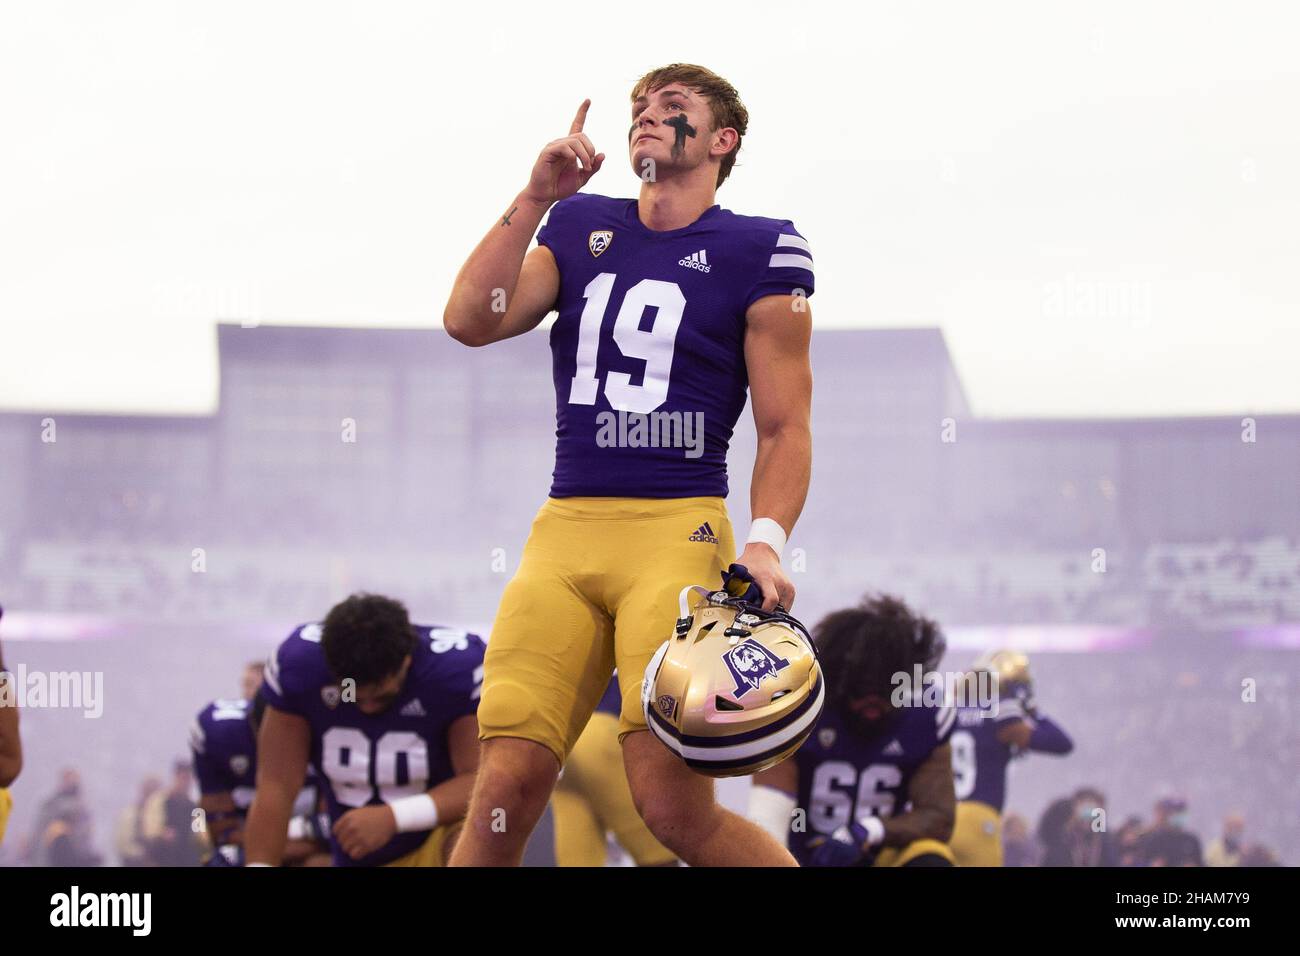 Seattle, WA, USA. 16th Oct, 2021. Washington Huskies wide receiver Sawyer Racanelli (19) in the endzone before a game between the UCLA Bruins and the Washington Huskies at Husky Stadium in Seattle, WA. Sean BrownCSM/Alamy Live News Stock Photo